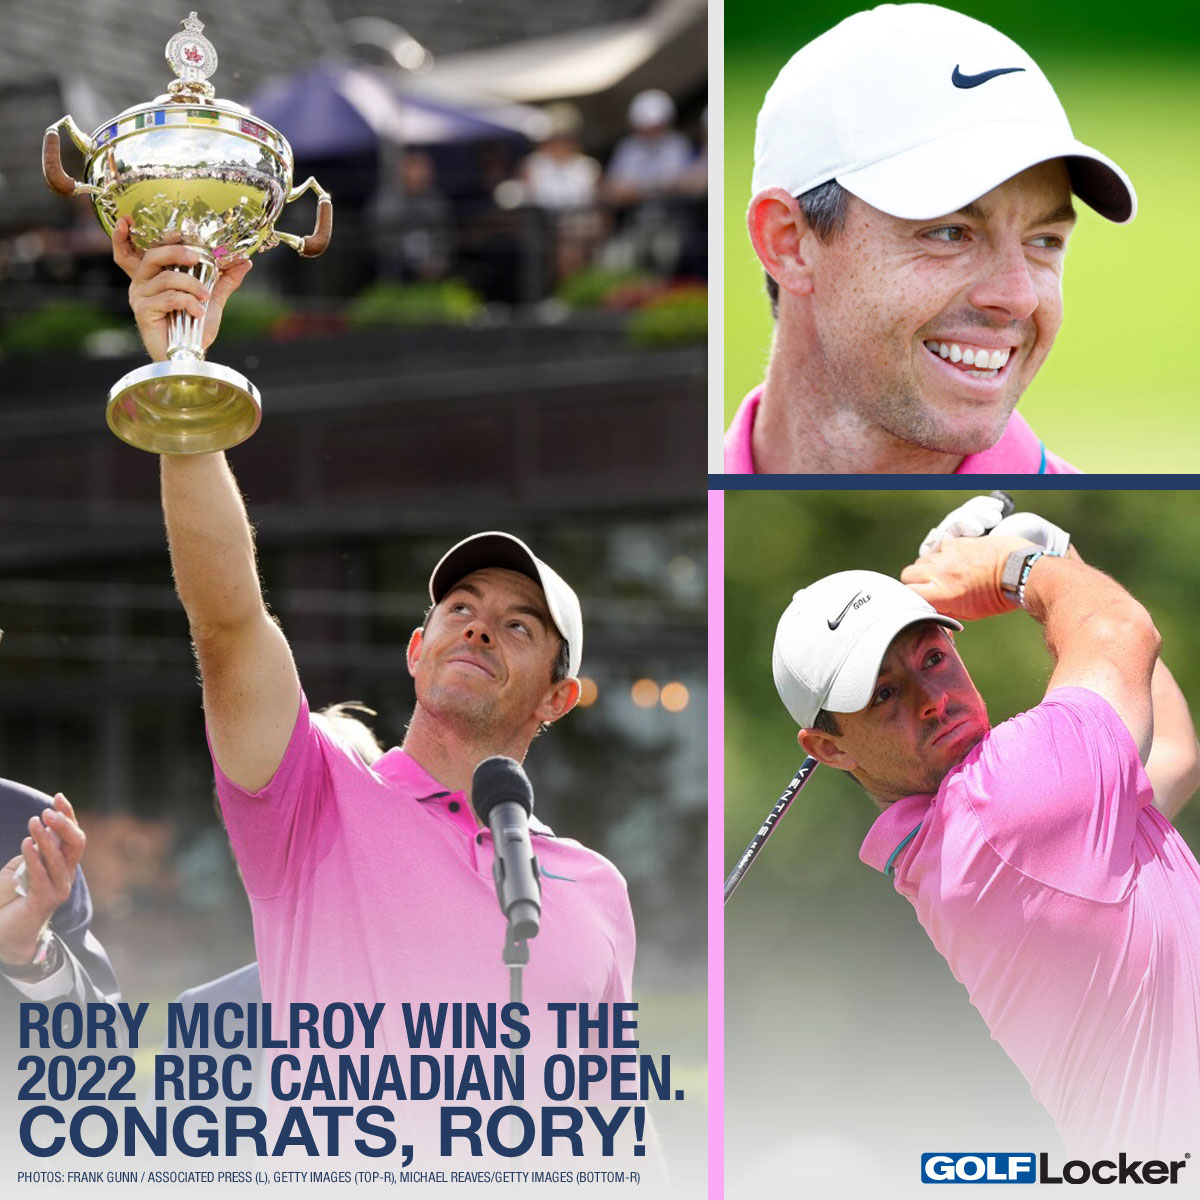 Rory McIlroy Wins the 2022 RBC Canadian Open. Congrats, Rory!